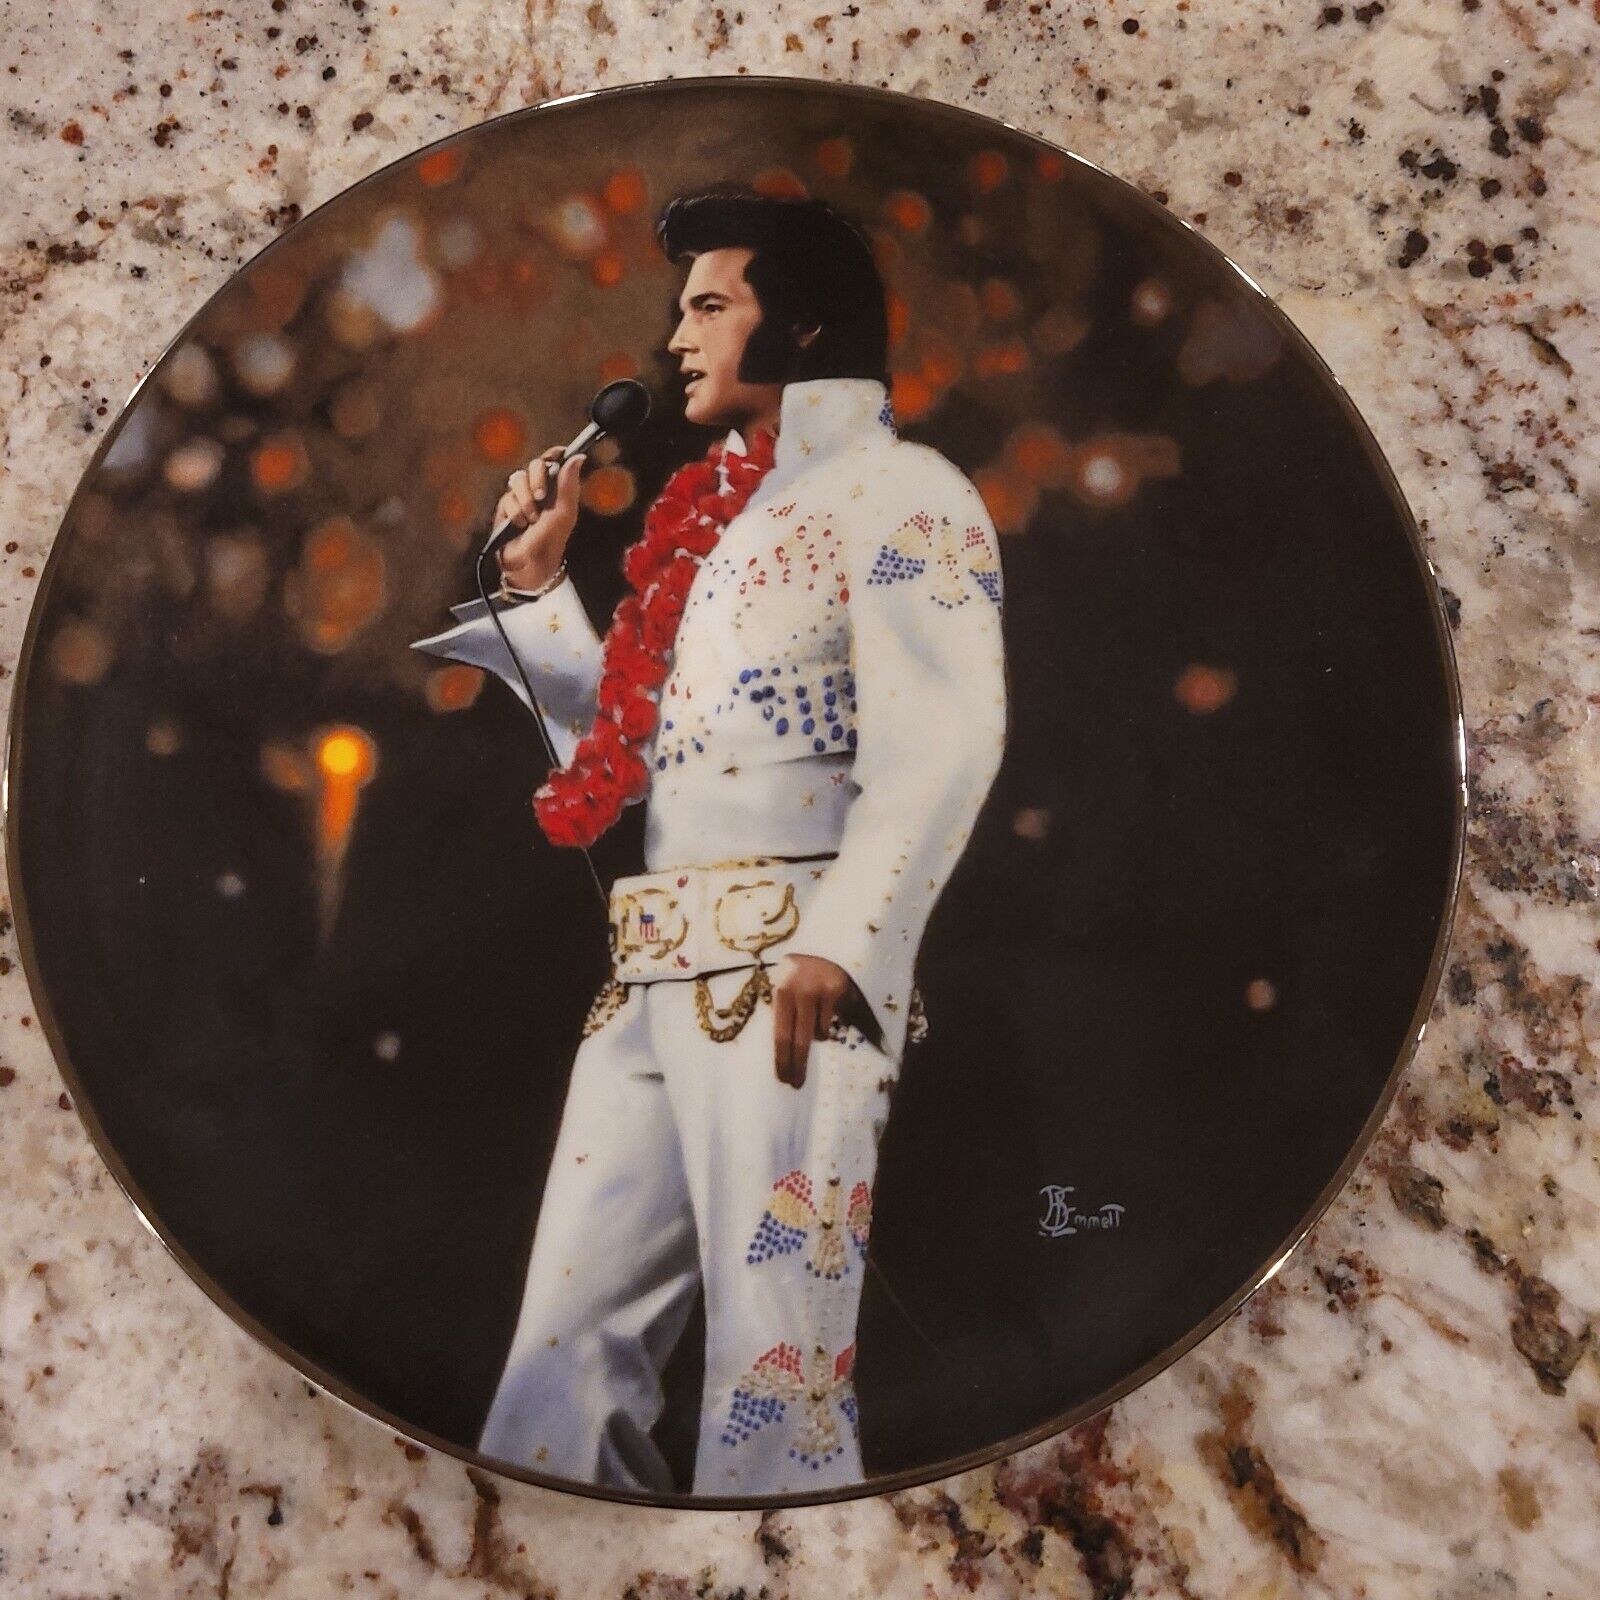  Elvis Presley Delphi 1991 Collectible Plate. Aloha From Hawaii. Bba7